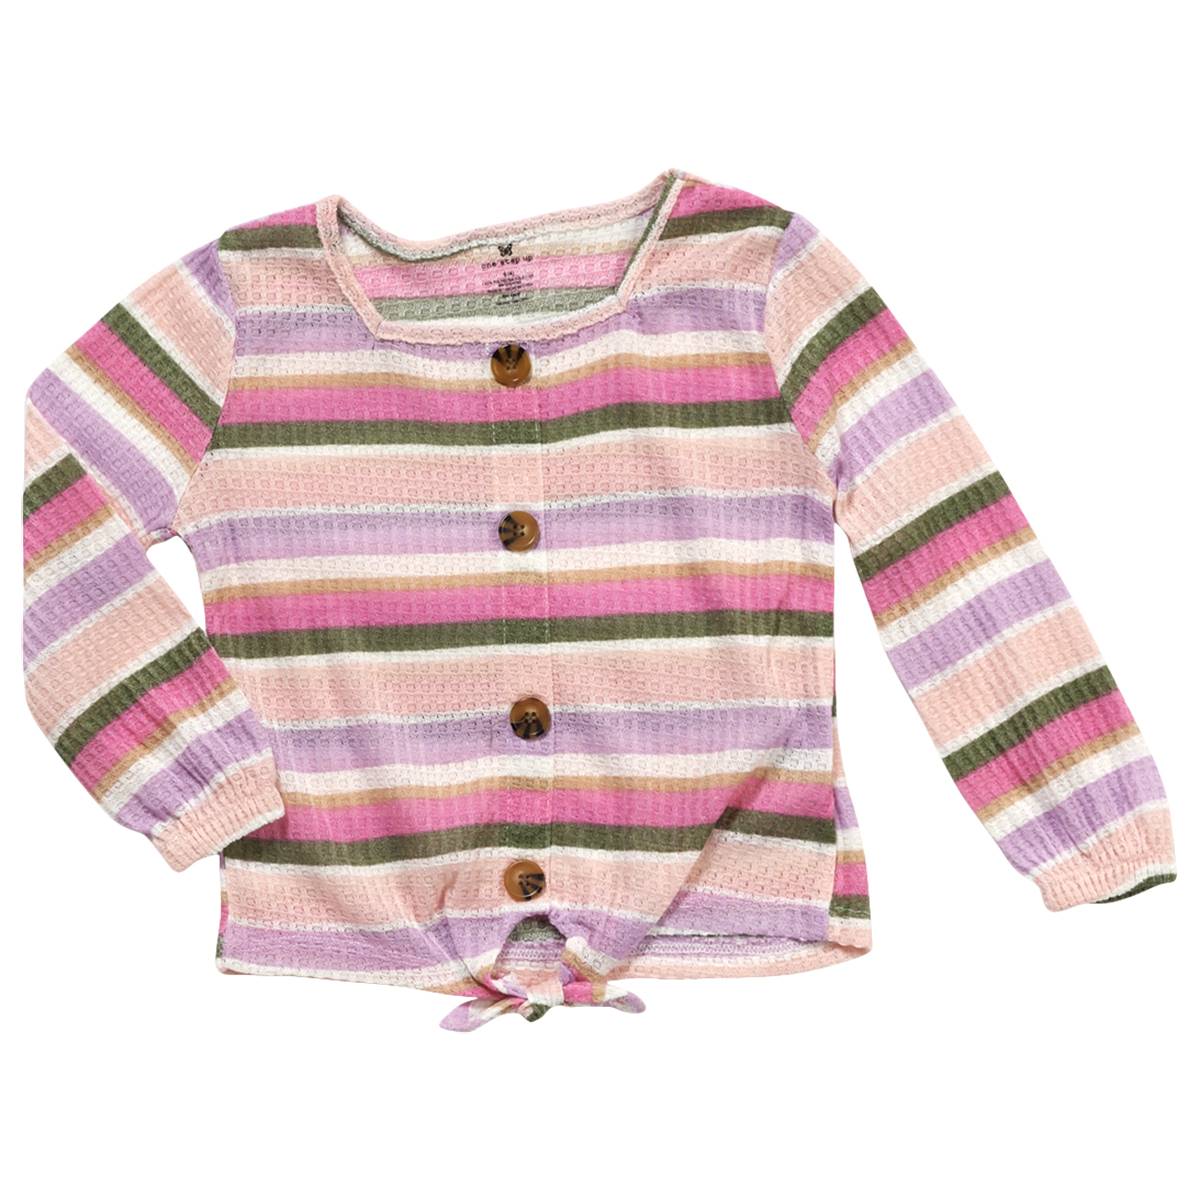 Girls (4-6x) One Step Up Stripe Tie Front Waffle Top - Vanilla